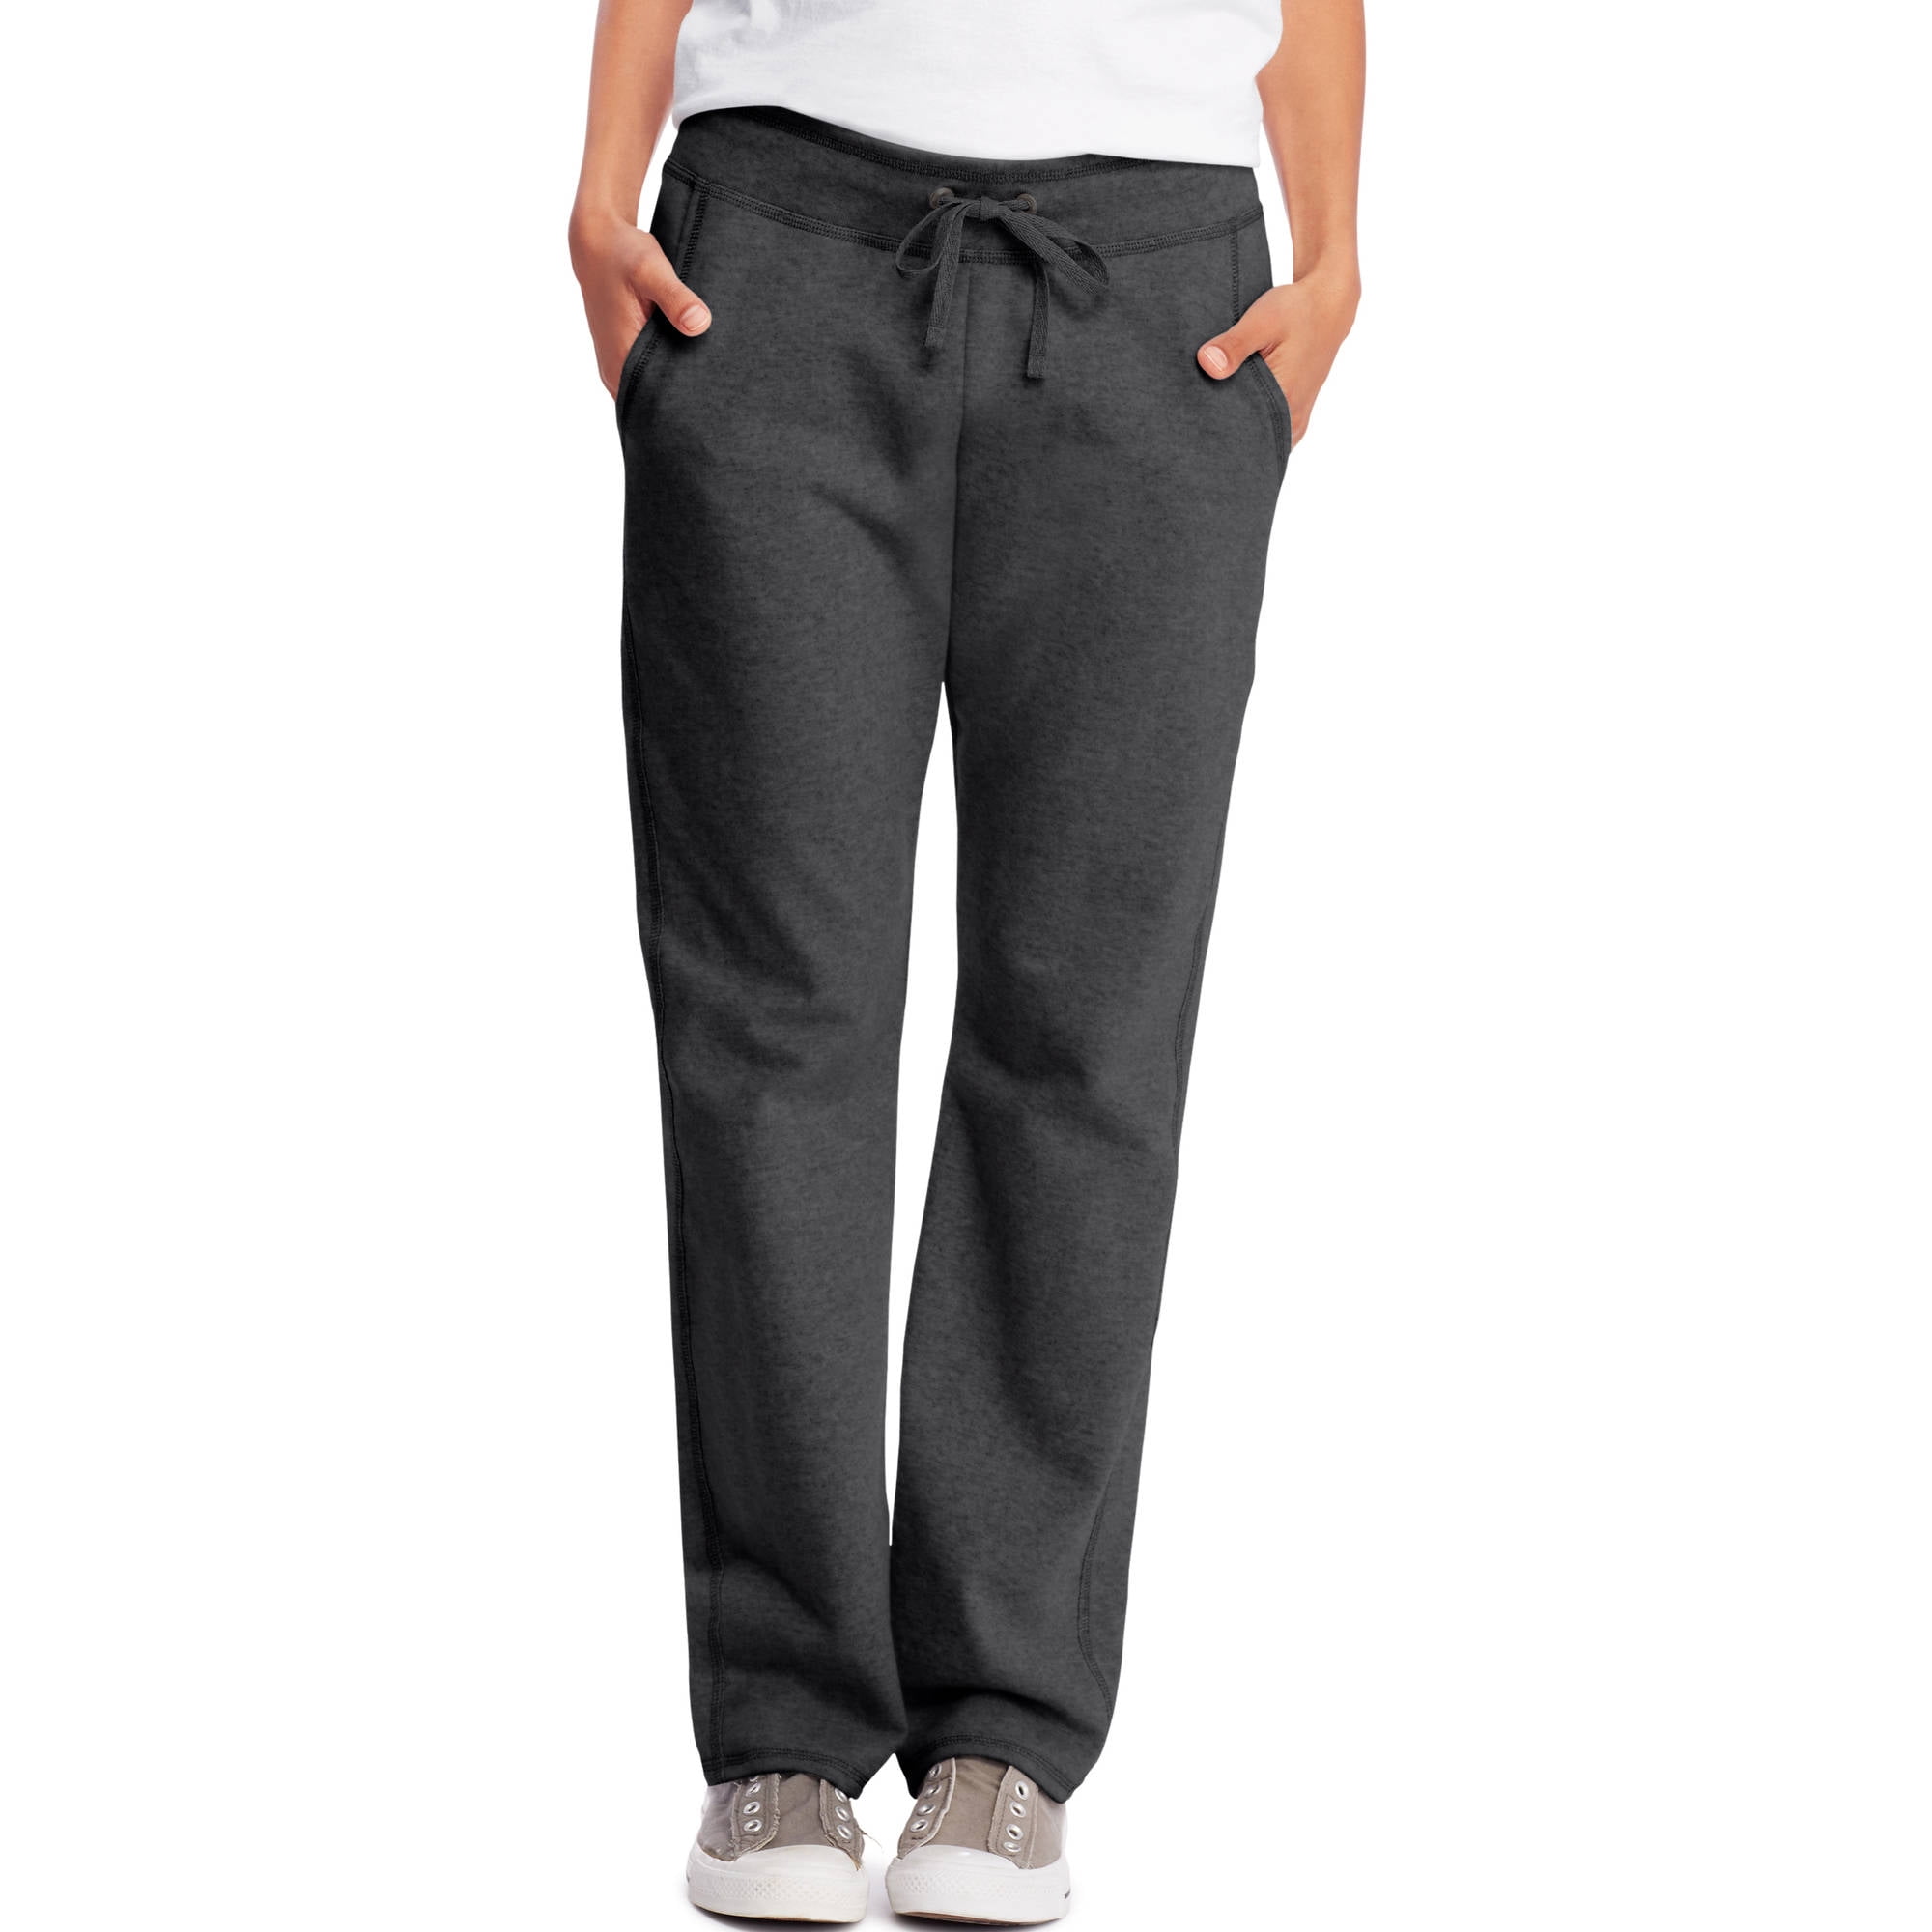 Hanes Women's French Terry Cloth Pants with Pockets, 30” Inseam, Sizes S-XXL